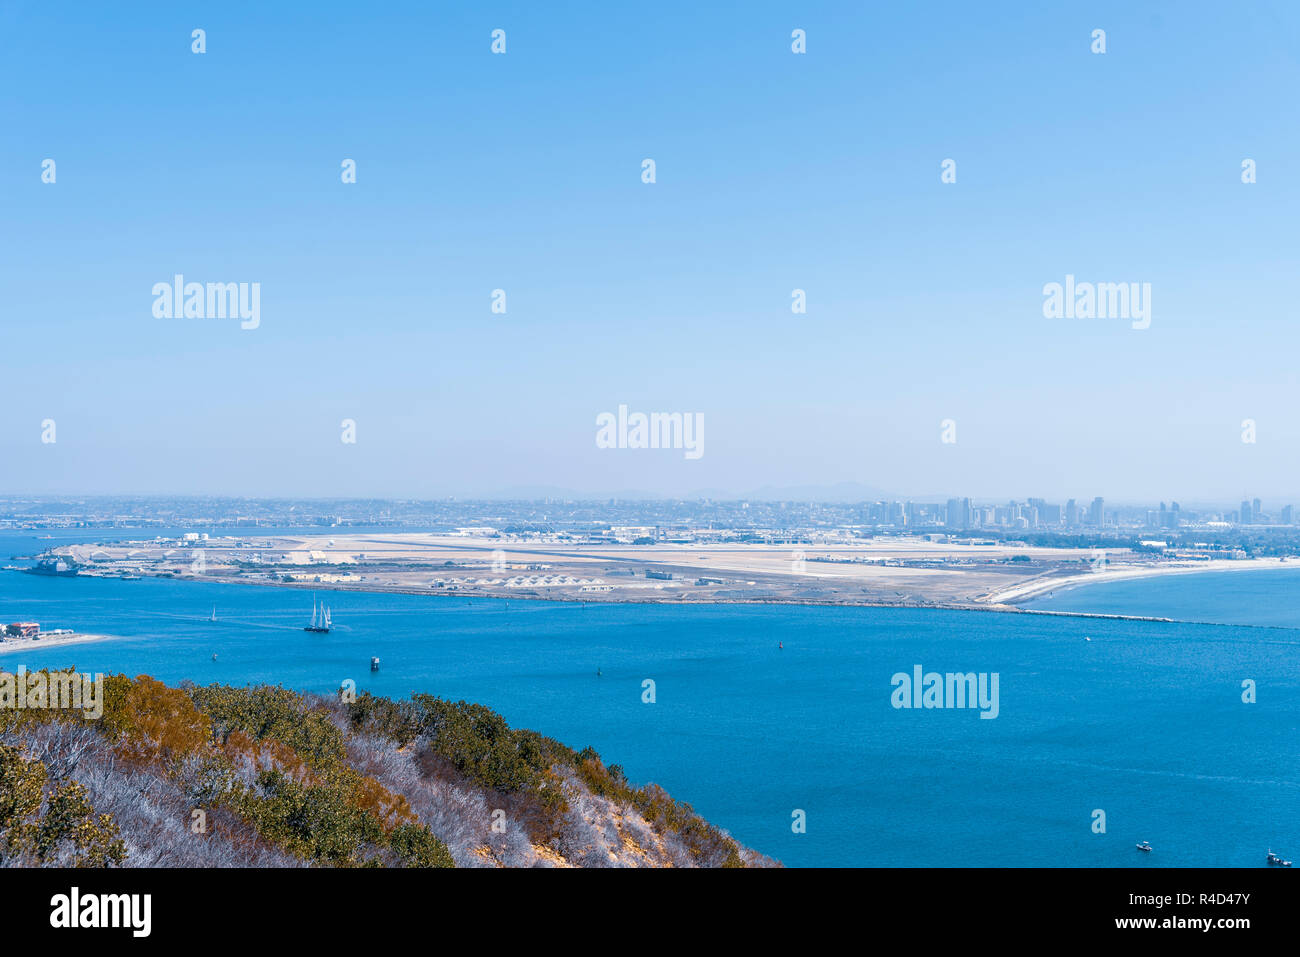 Looking over mountain at San Diego bay below with island in background. Stock Photo